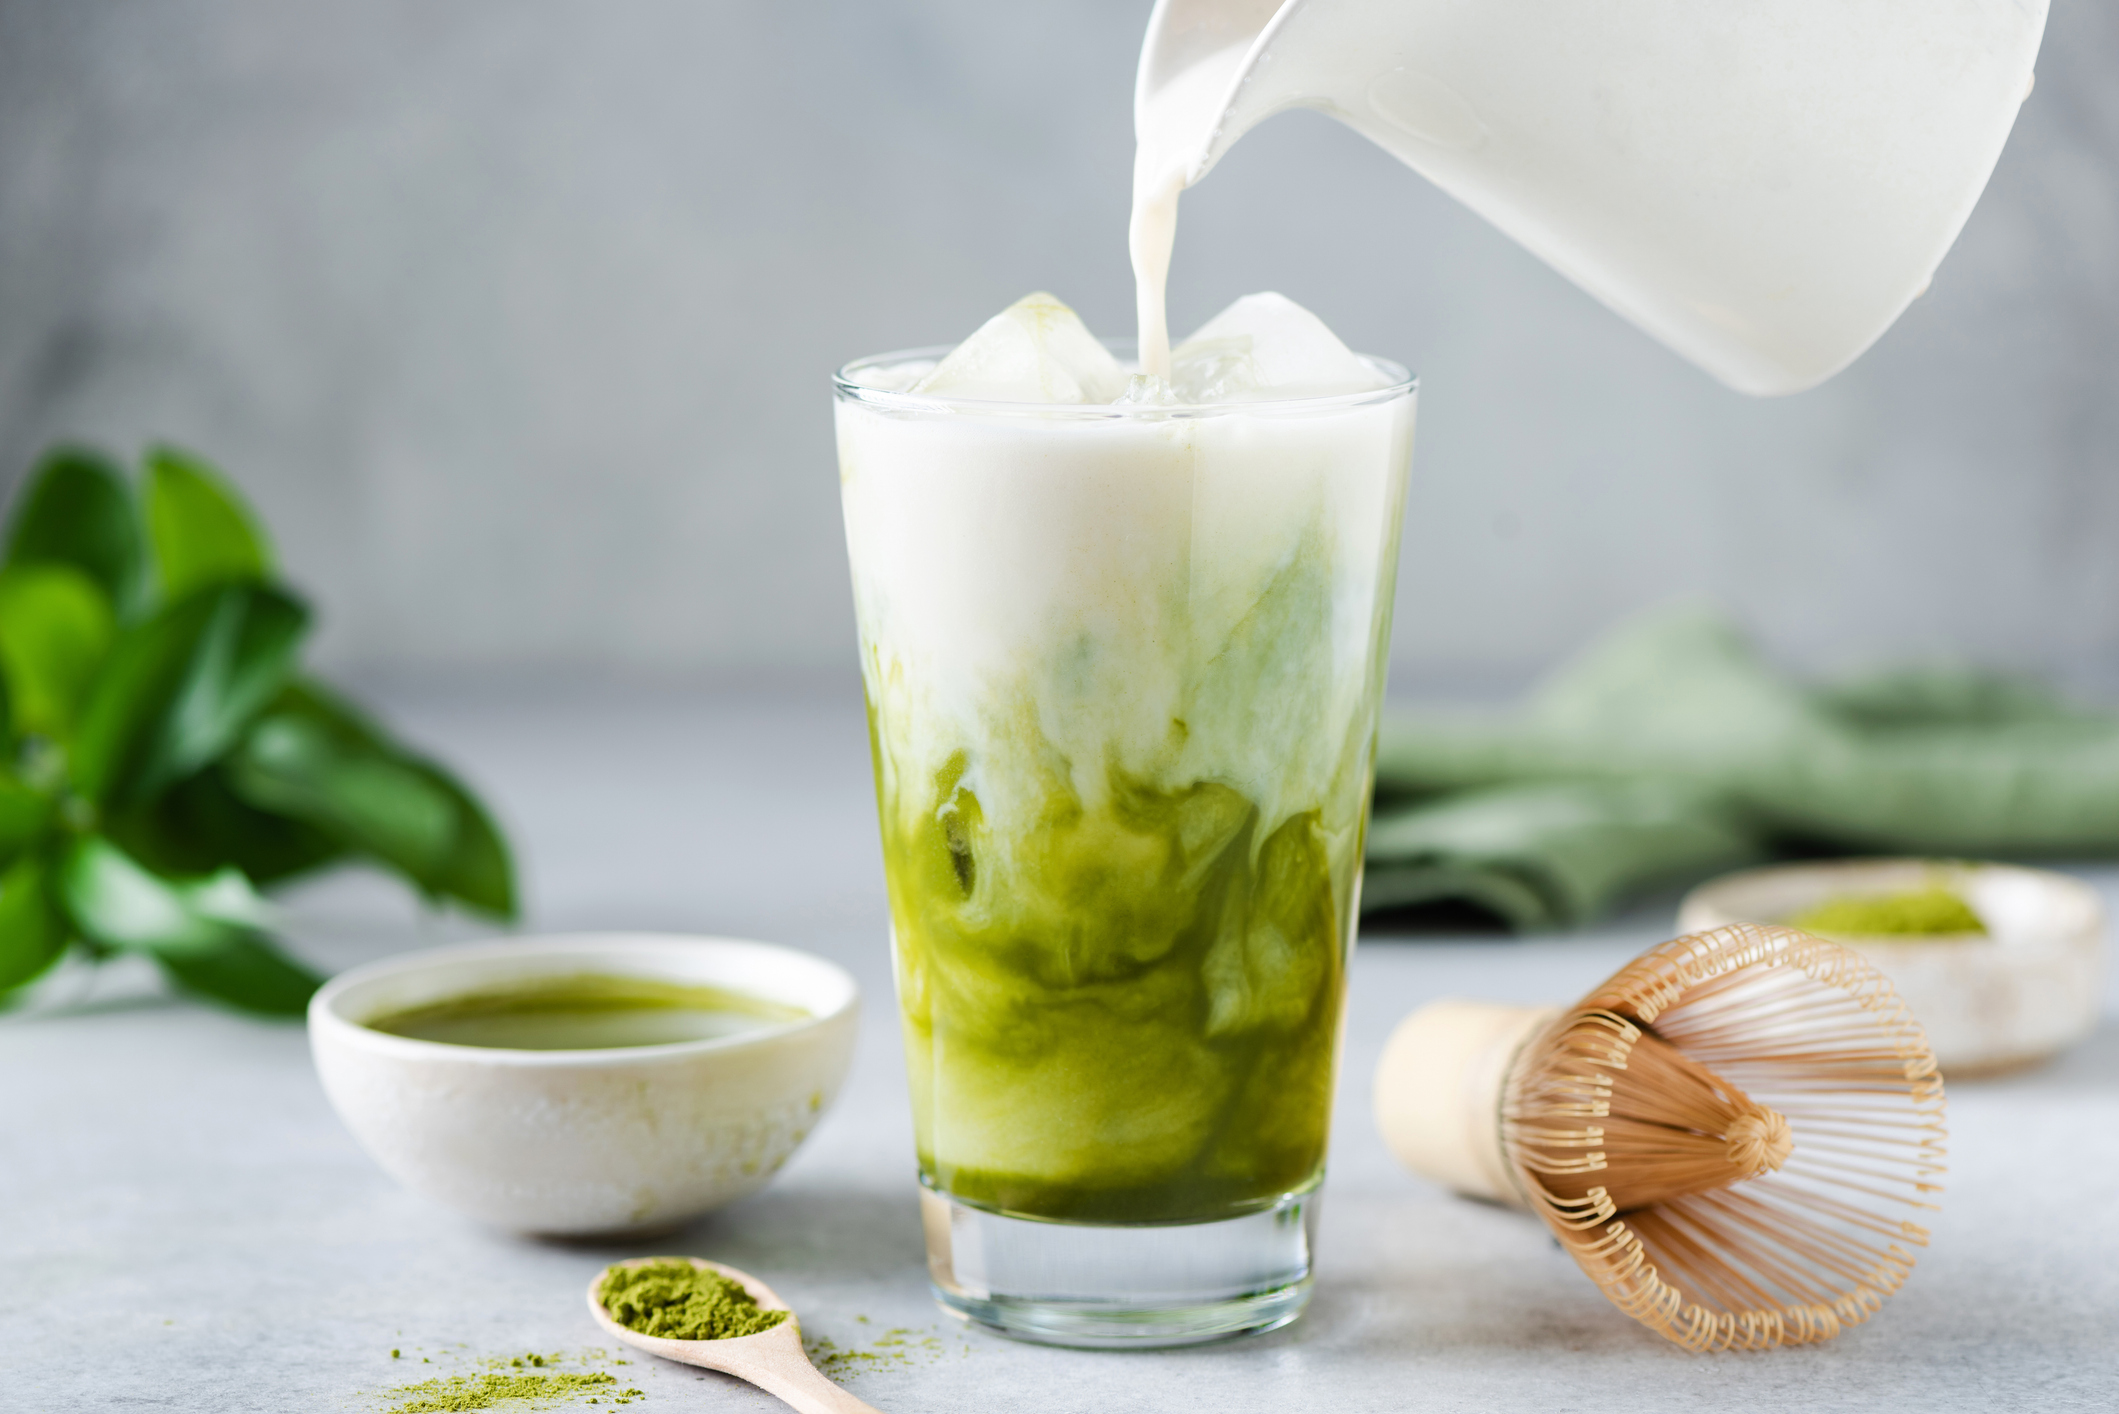 Why everyone went crazy about Matcha?